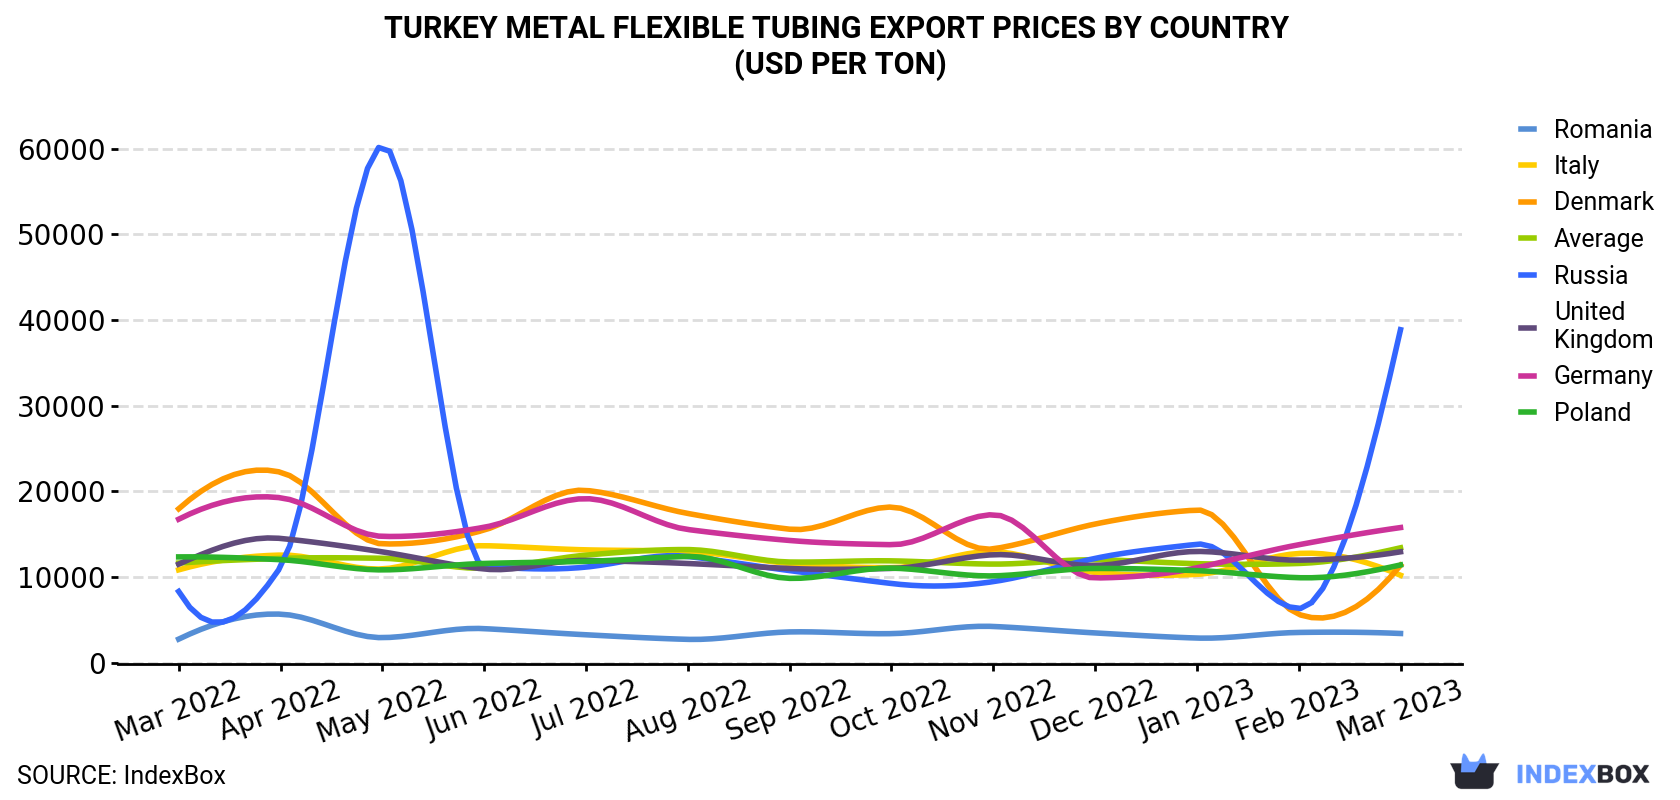 Turkey Metal Flexible Tubing Export Prices By Country (USD Per Ton)